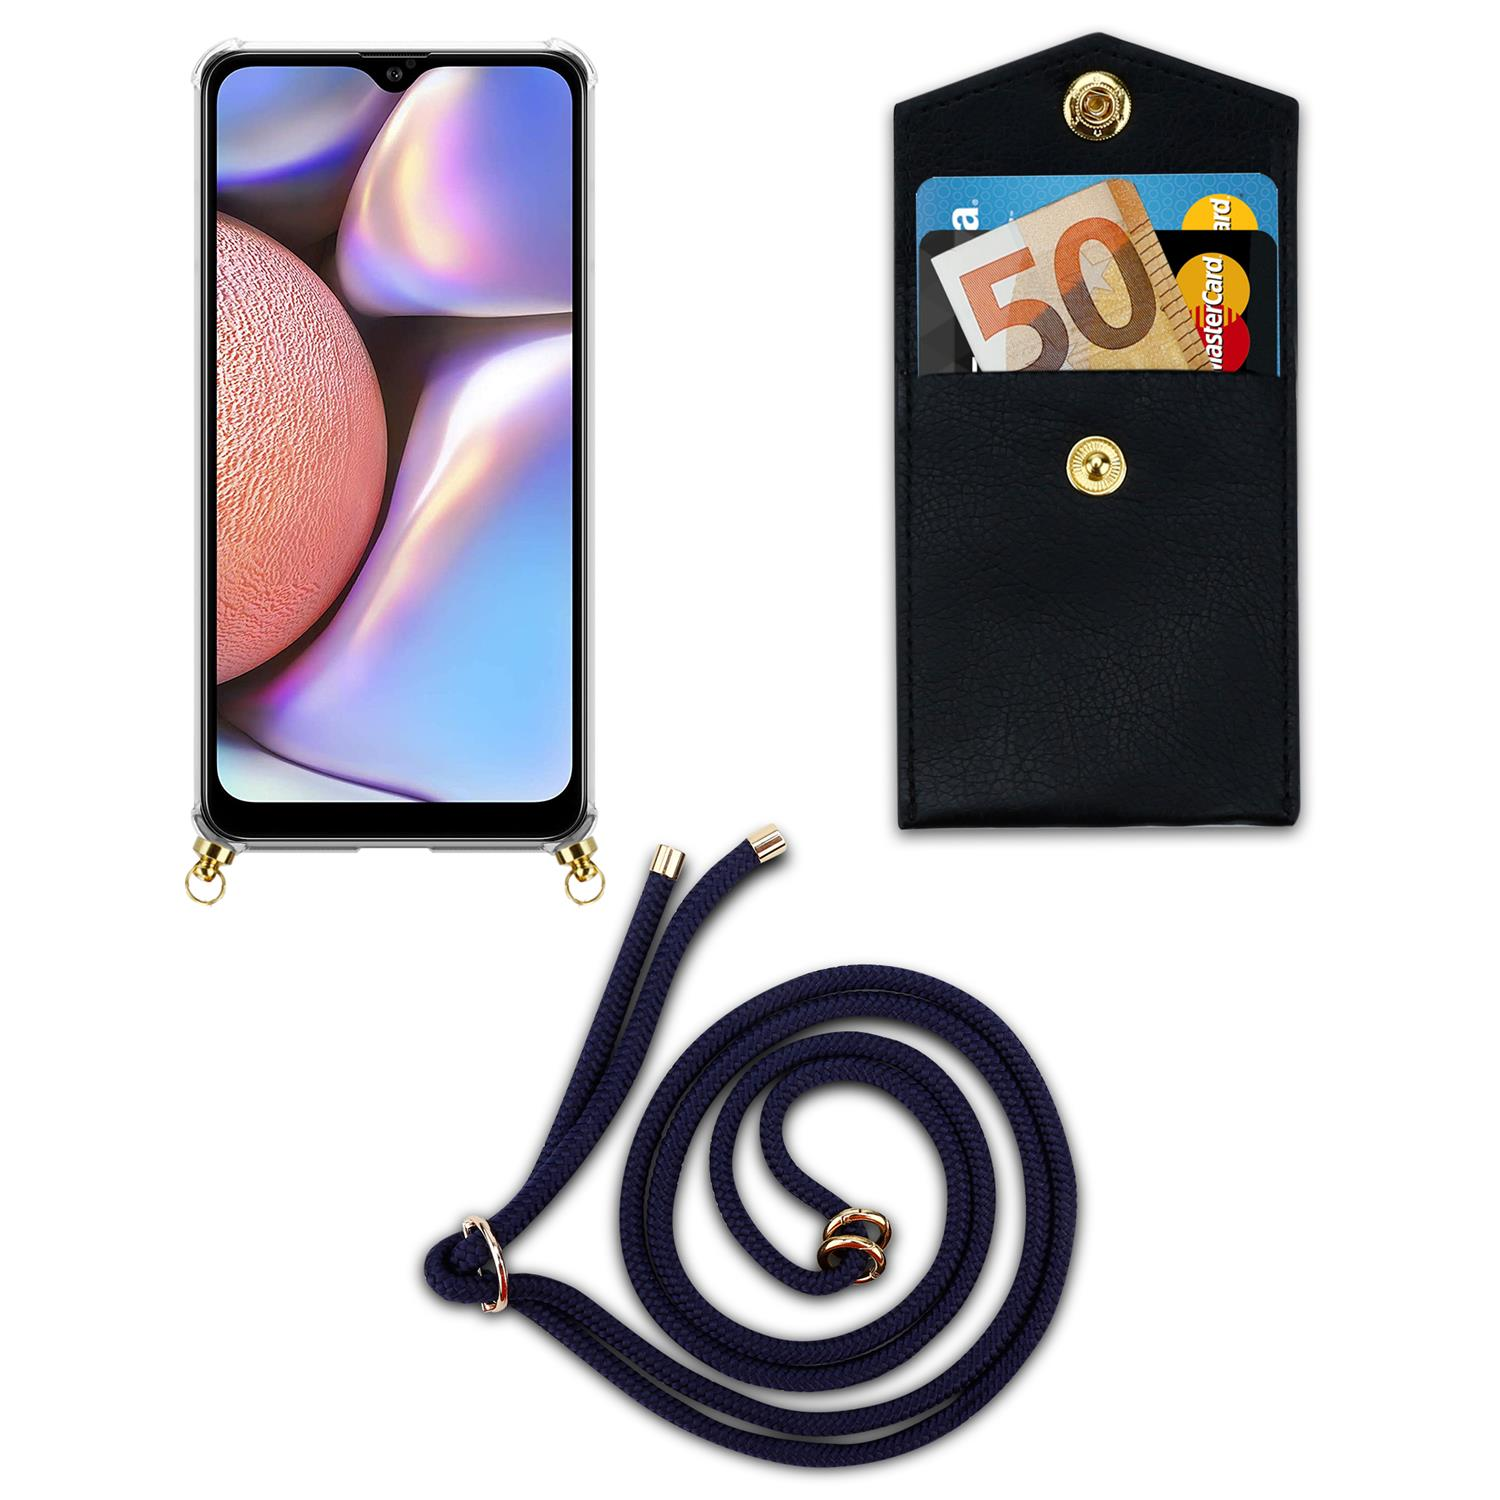 CADORABO Handy Kette TIEF Backcover, / M01s, Band abnehmbarer BLAU Kordel Galaxy Gold A10s Samsung, Hülle, und Ringen, mit